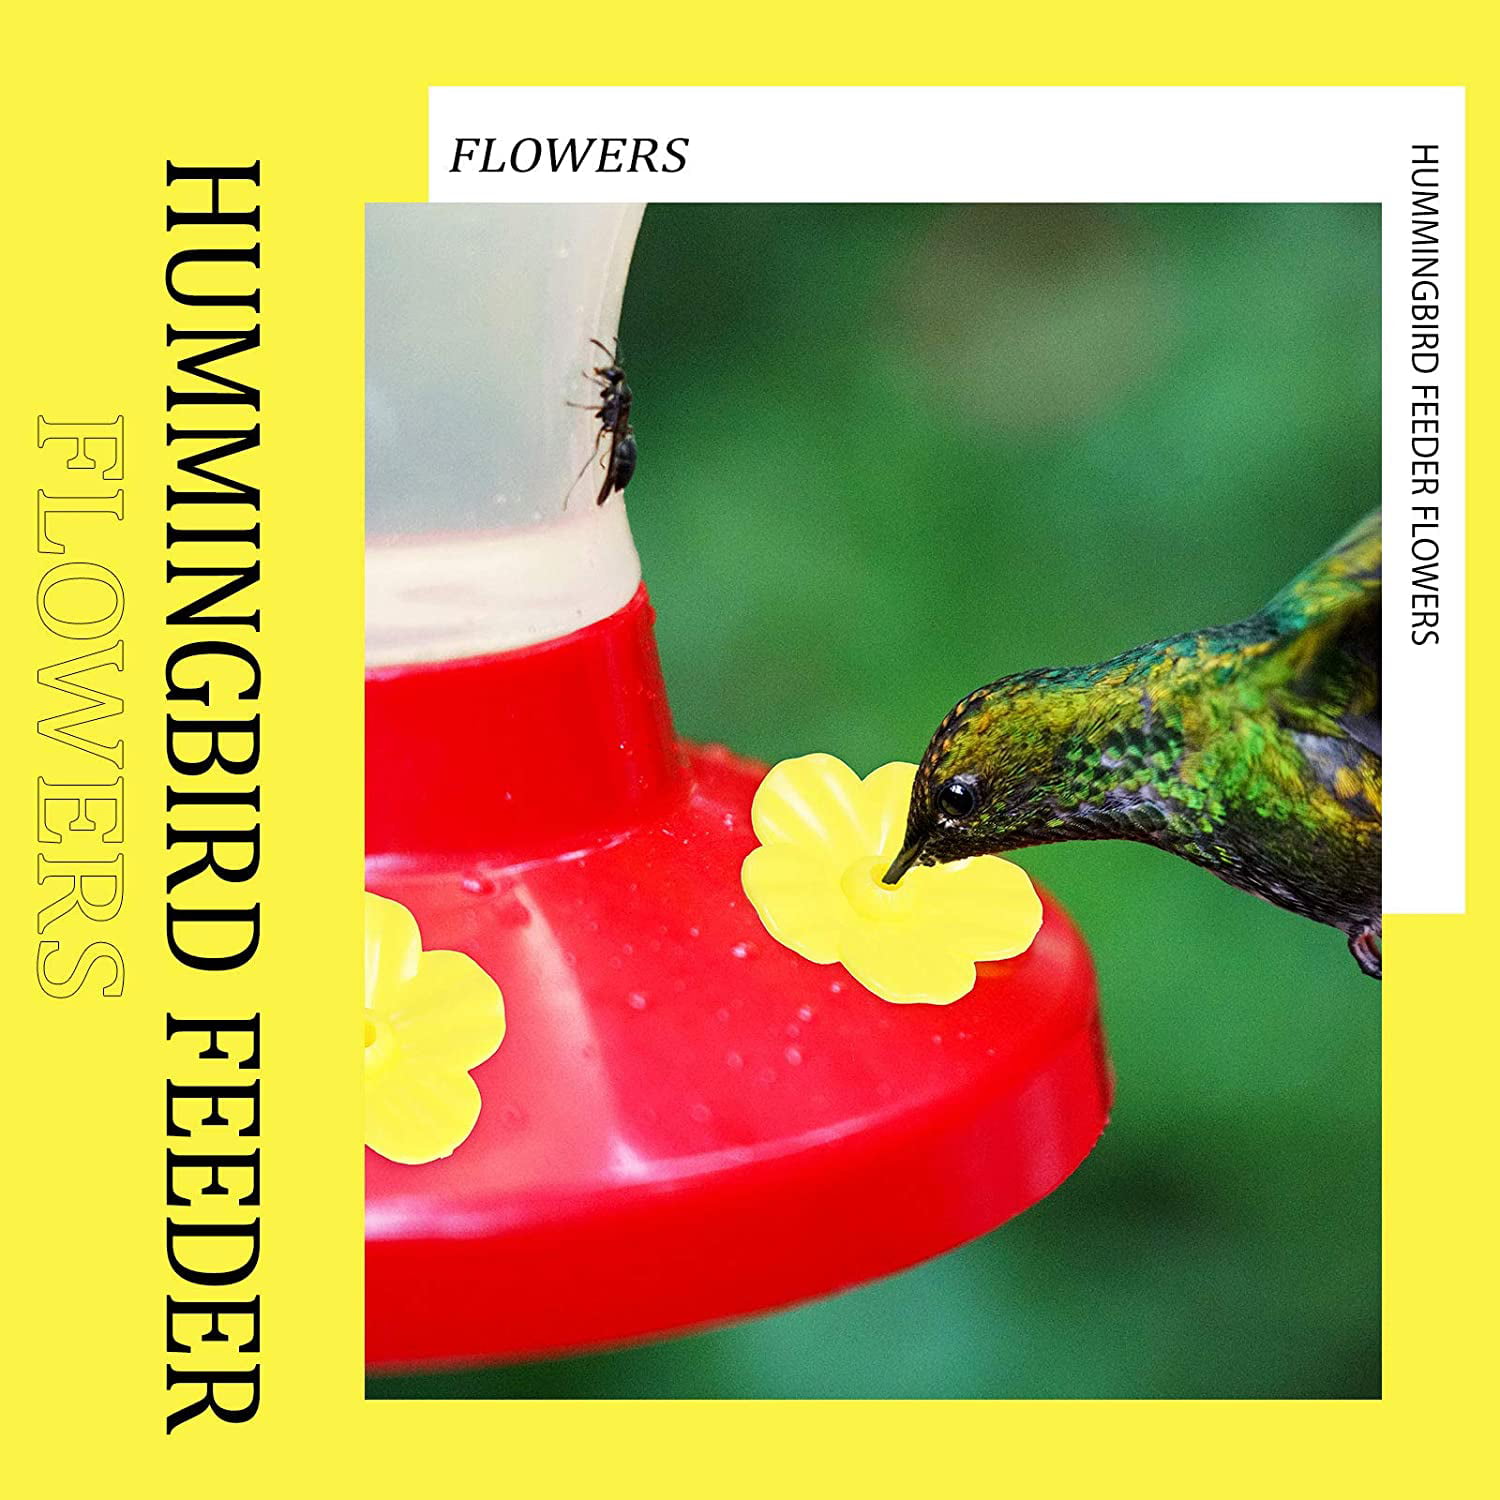 More Birds 501 Hummingbird Replacement Flowers for Hummingird Feeder for sale online 